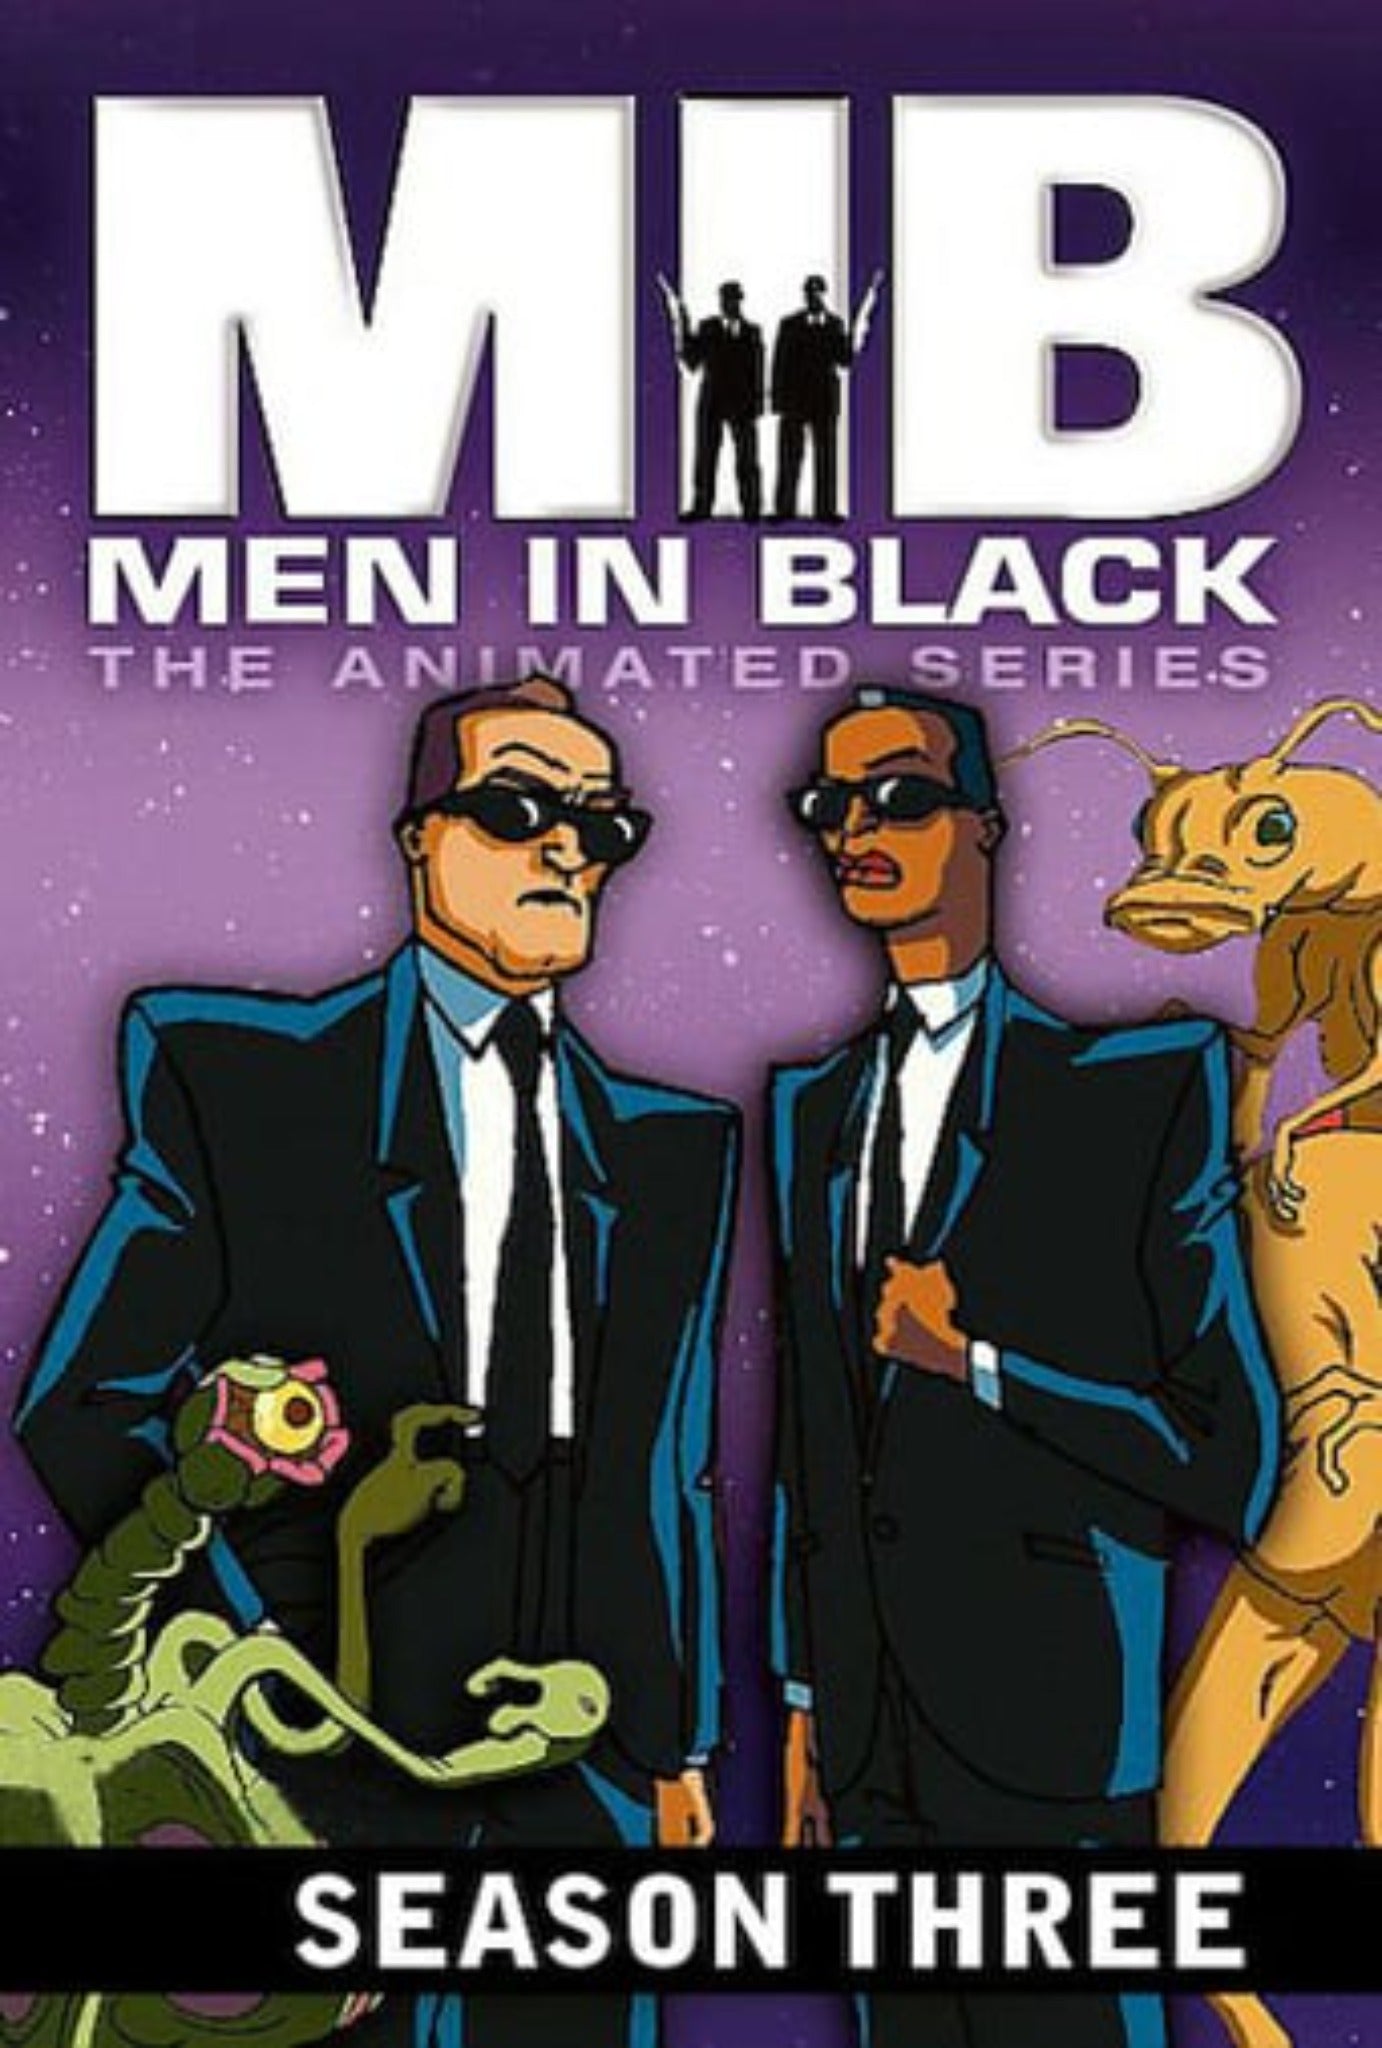 Men in Black: The Series Season 3 Complete Pack 1999 Animation - Action - Adventure - Comedy